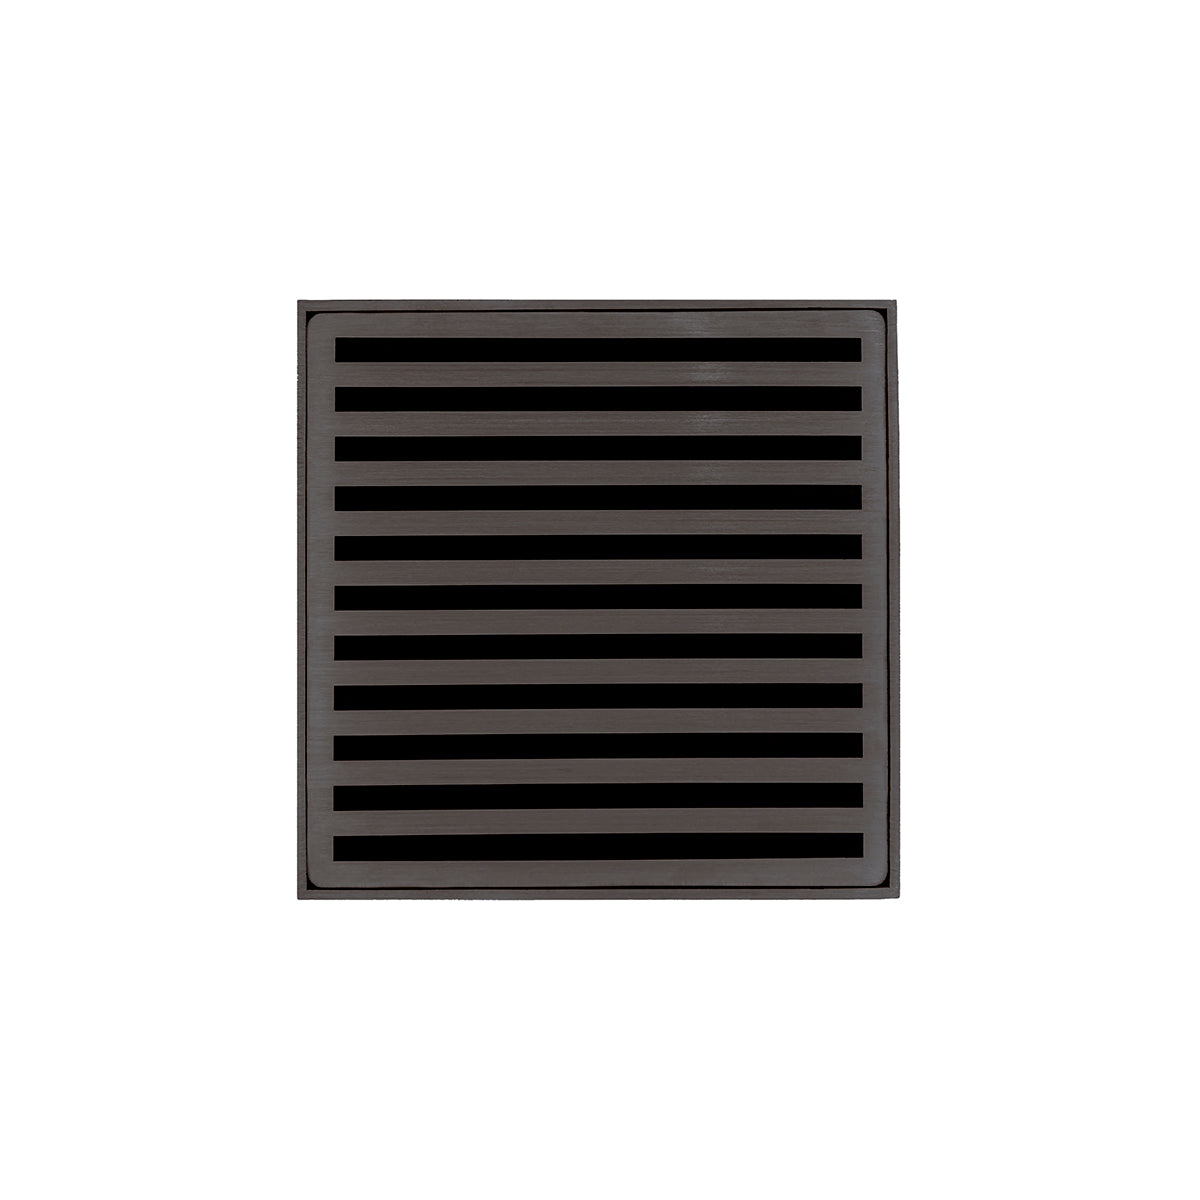 Infinity Drain 5" x 5" ND 5 Premium Center Drain Kit with Lines Pattern Decorative Plate with ABS Drain Body, 2" Outlet